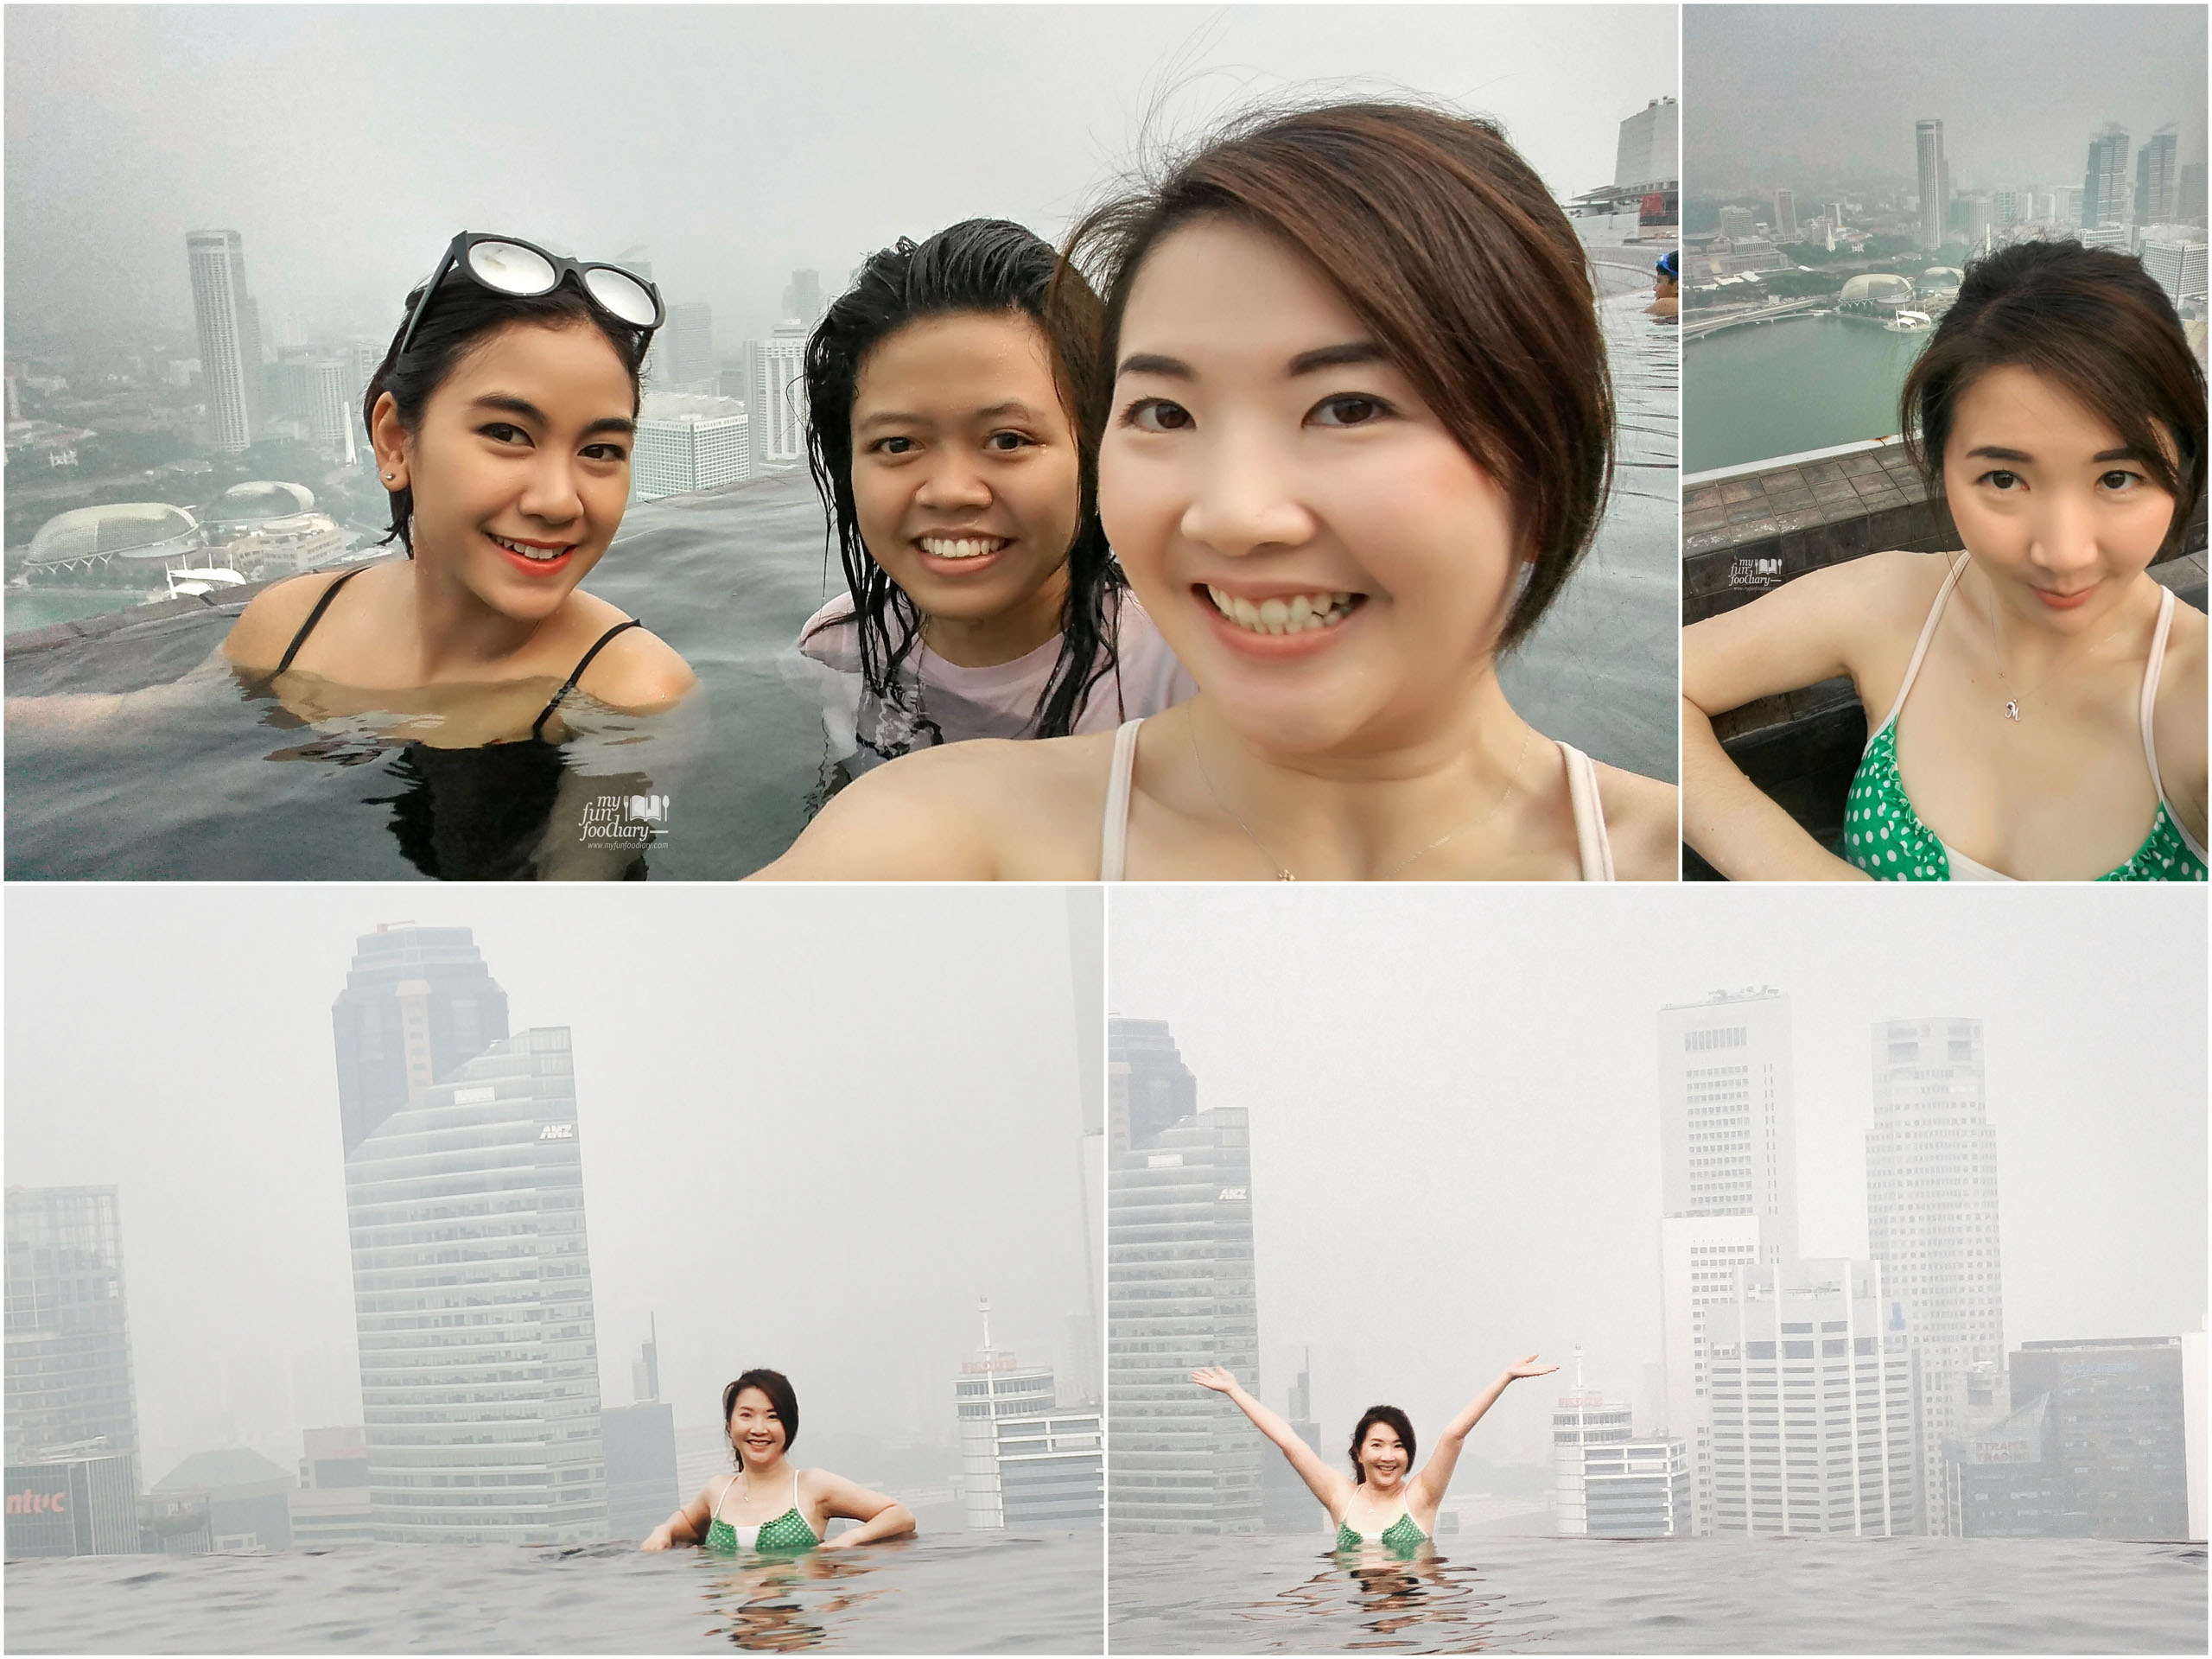 Anisa Listy and Me had fun together in the Infinity Pool at the rooftop of Marina Bay Sands by Myfunfoodiary